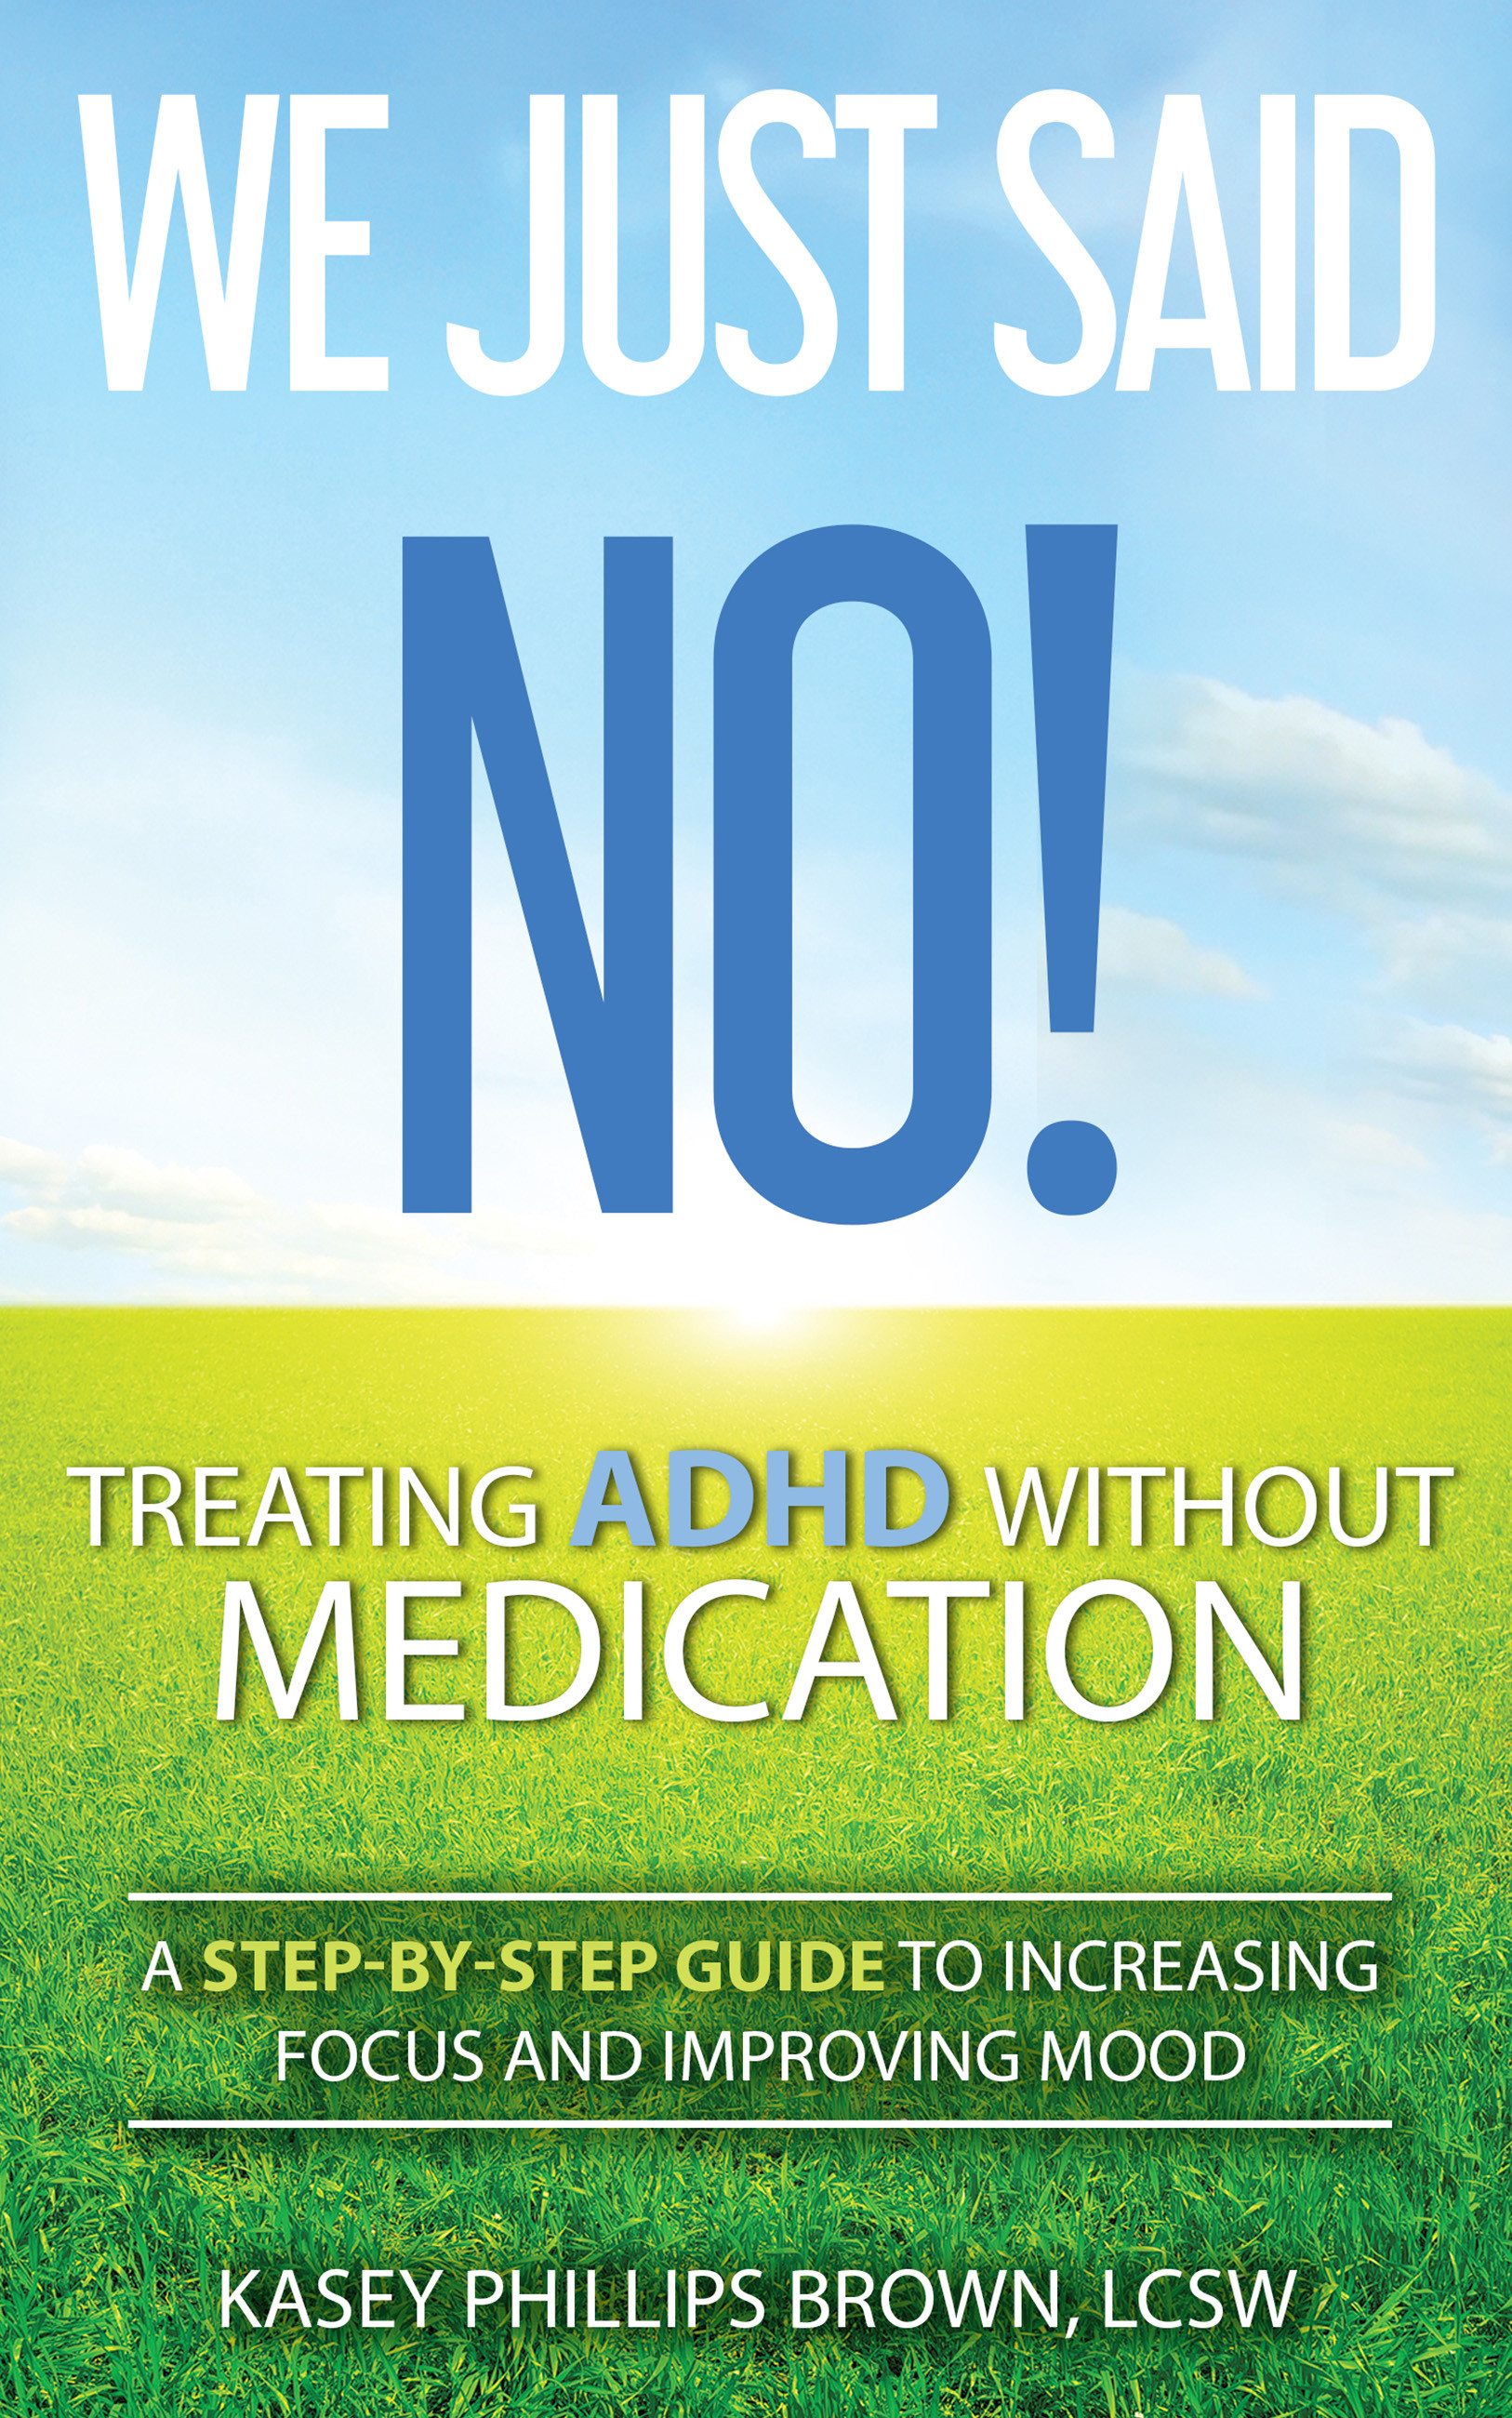 We Just Said No! Treating ADHD Without Medication